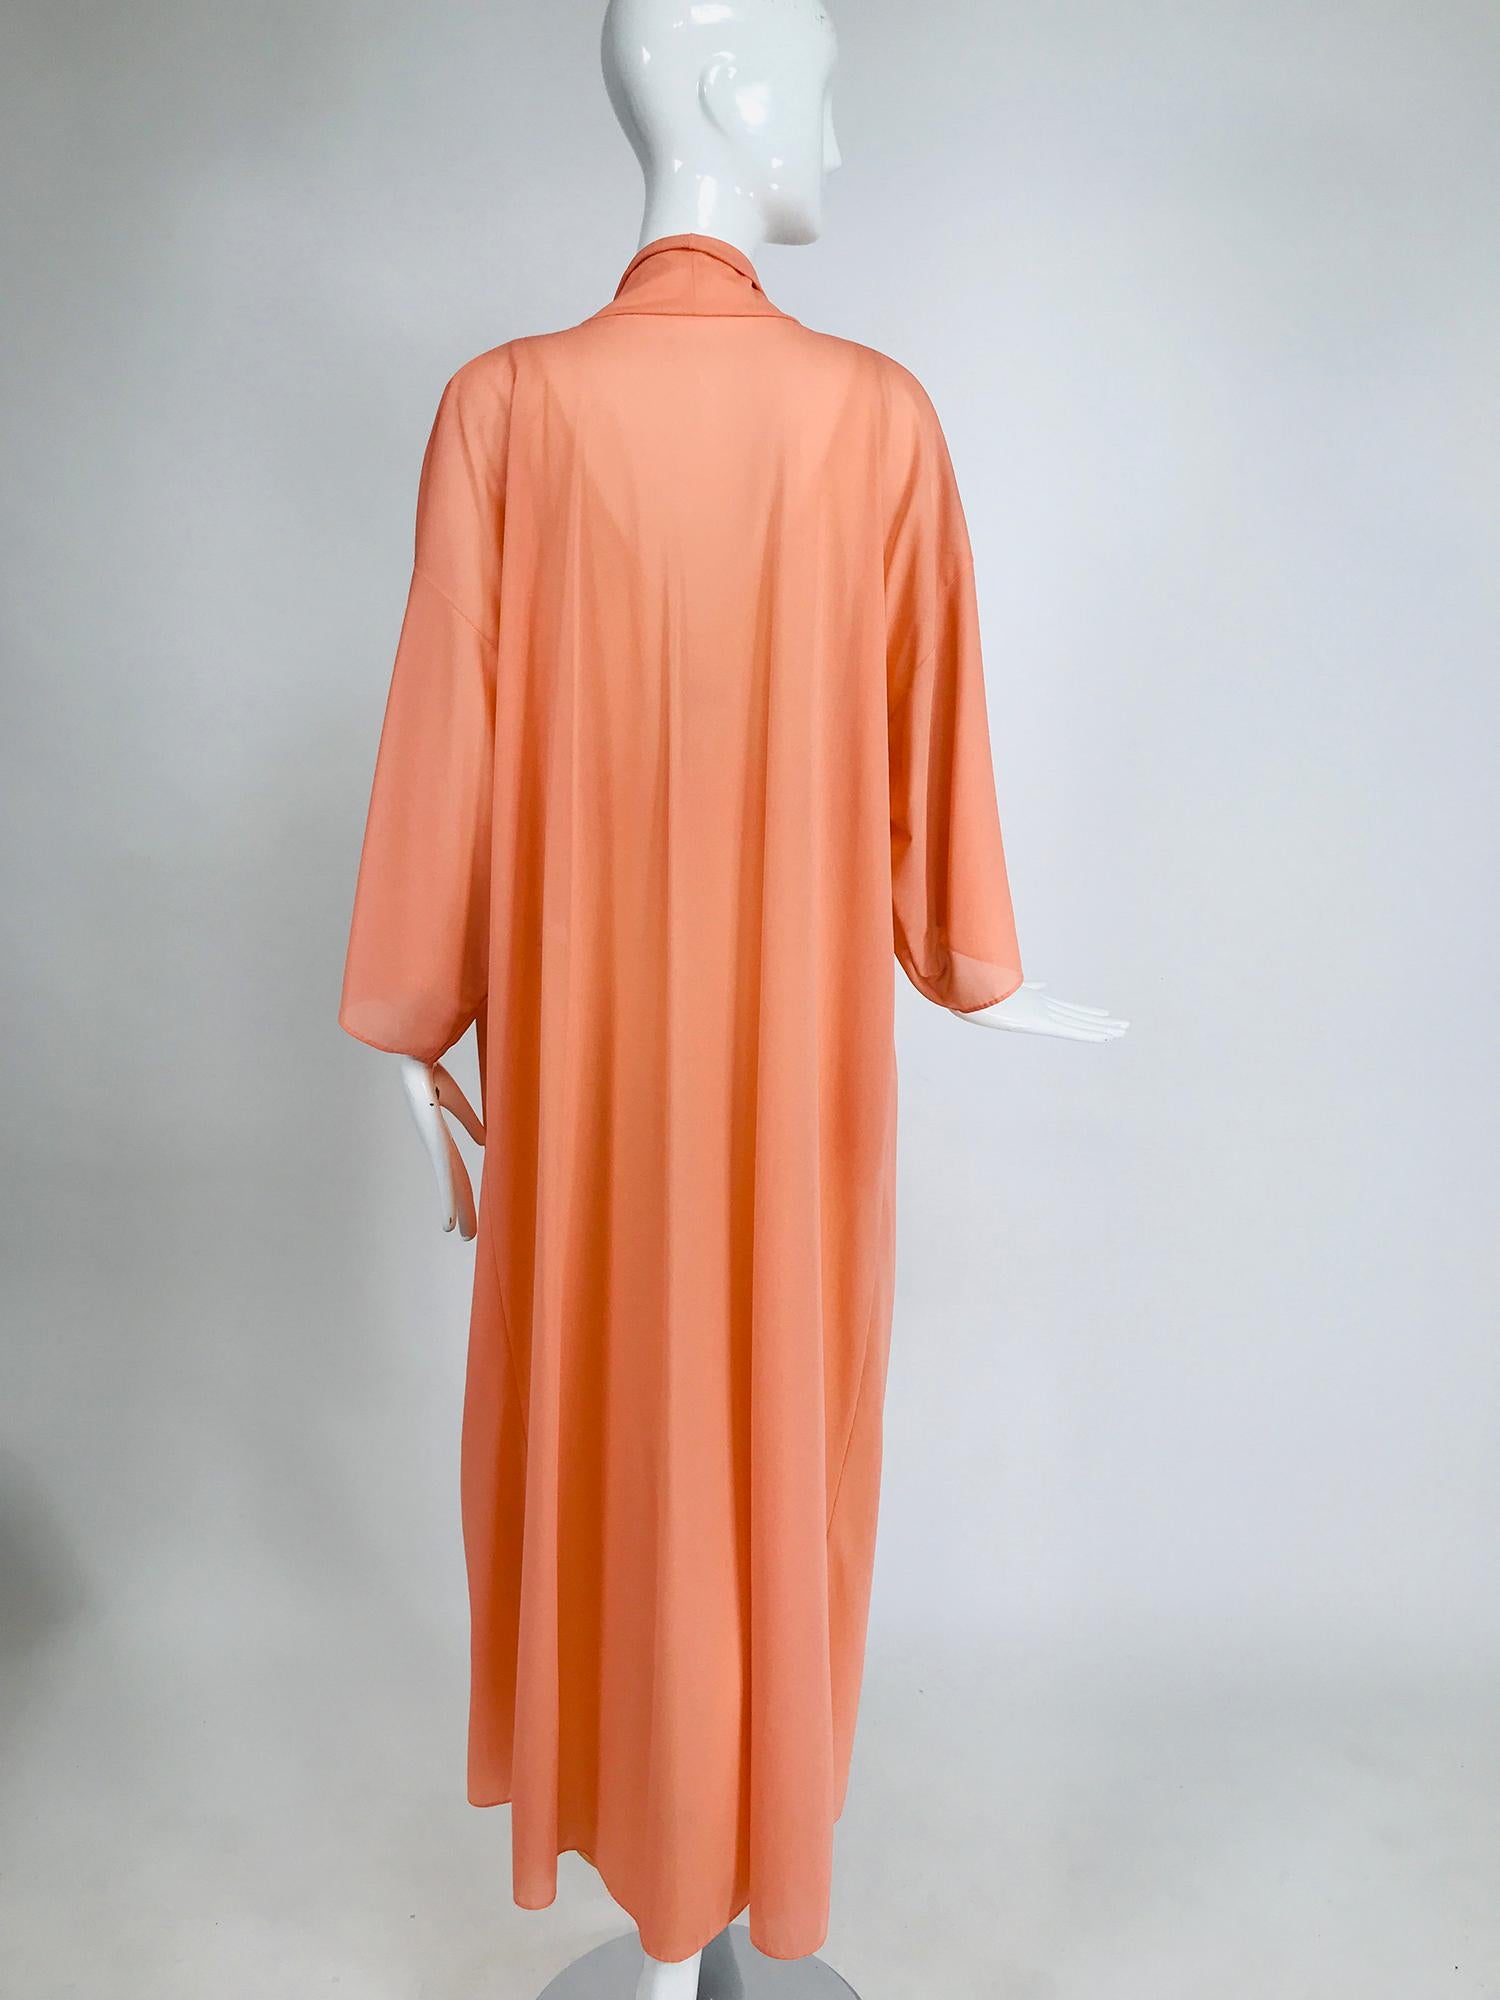 Women's Emilio Pucci for Formfit Rogers 2pc. Sheer Peignoir Robe & Gown 1970s